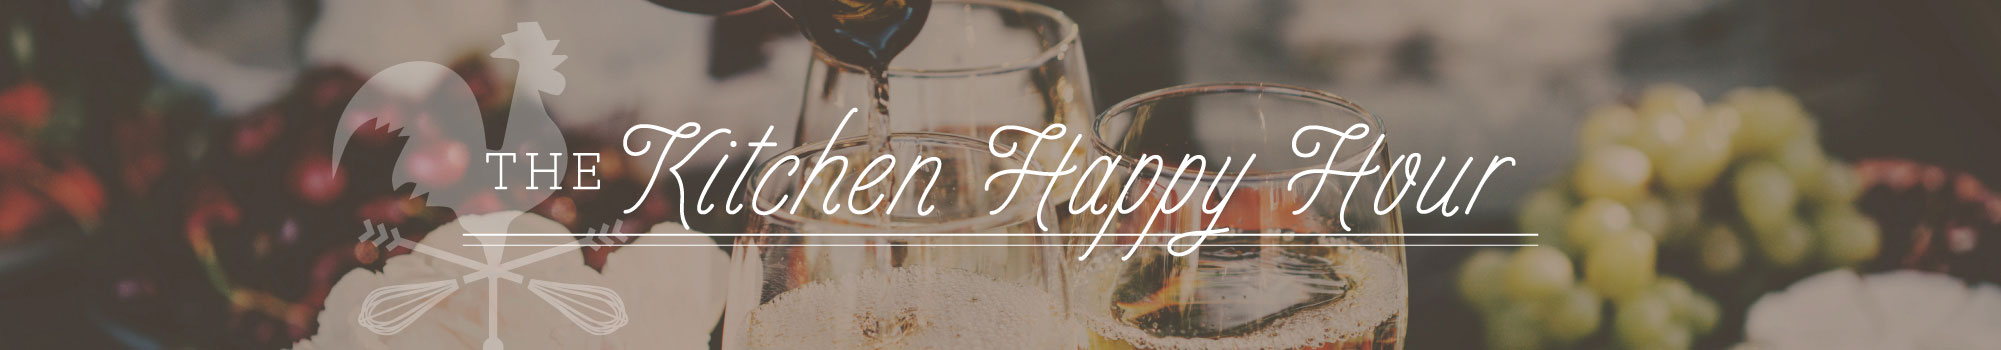 The Kitchen Happy Hour • Middleground Farms